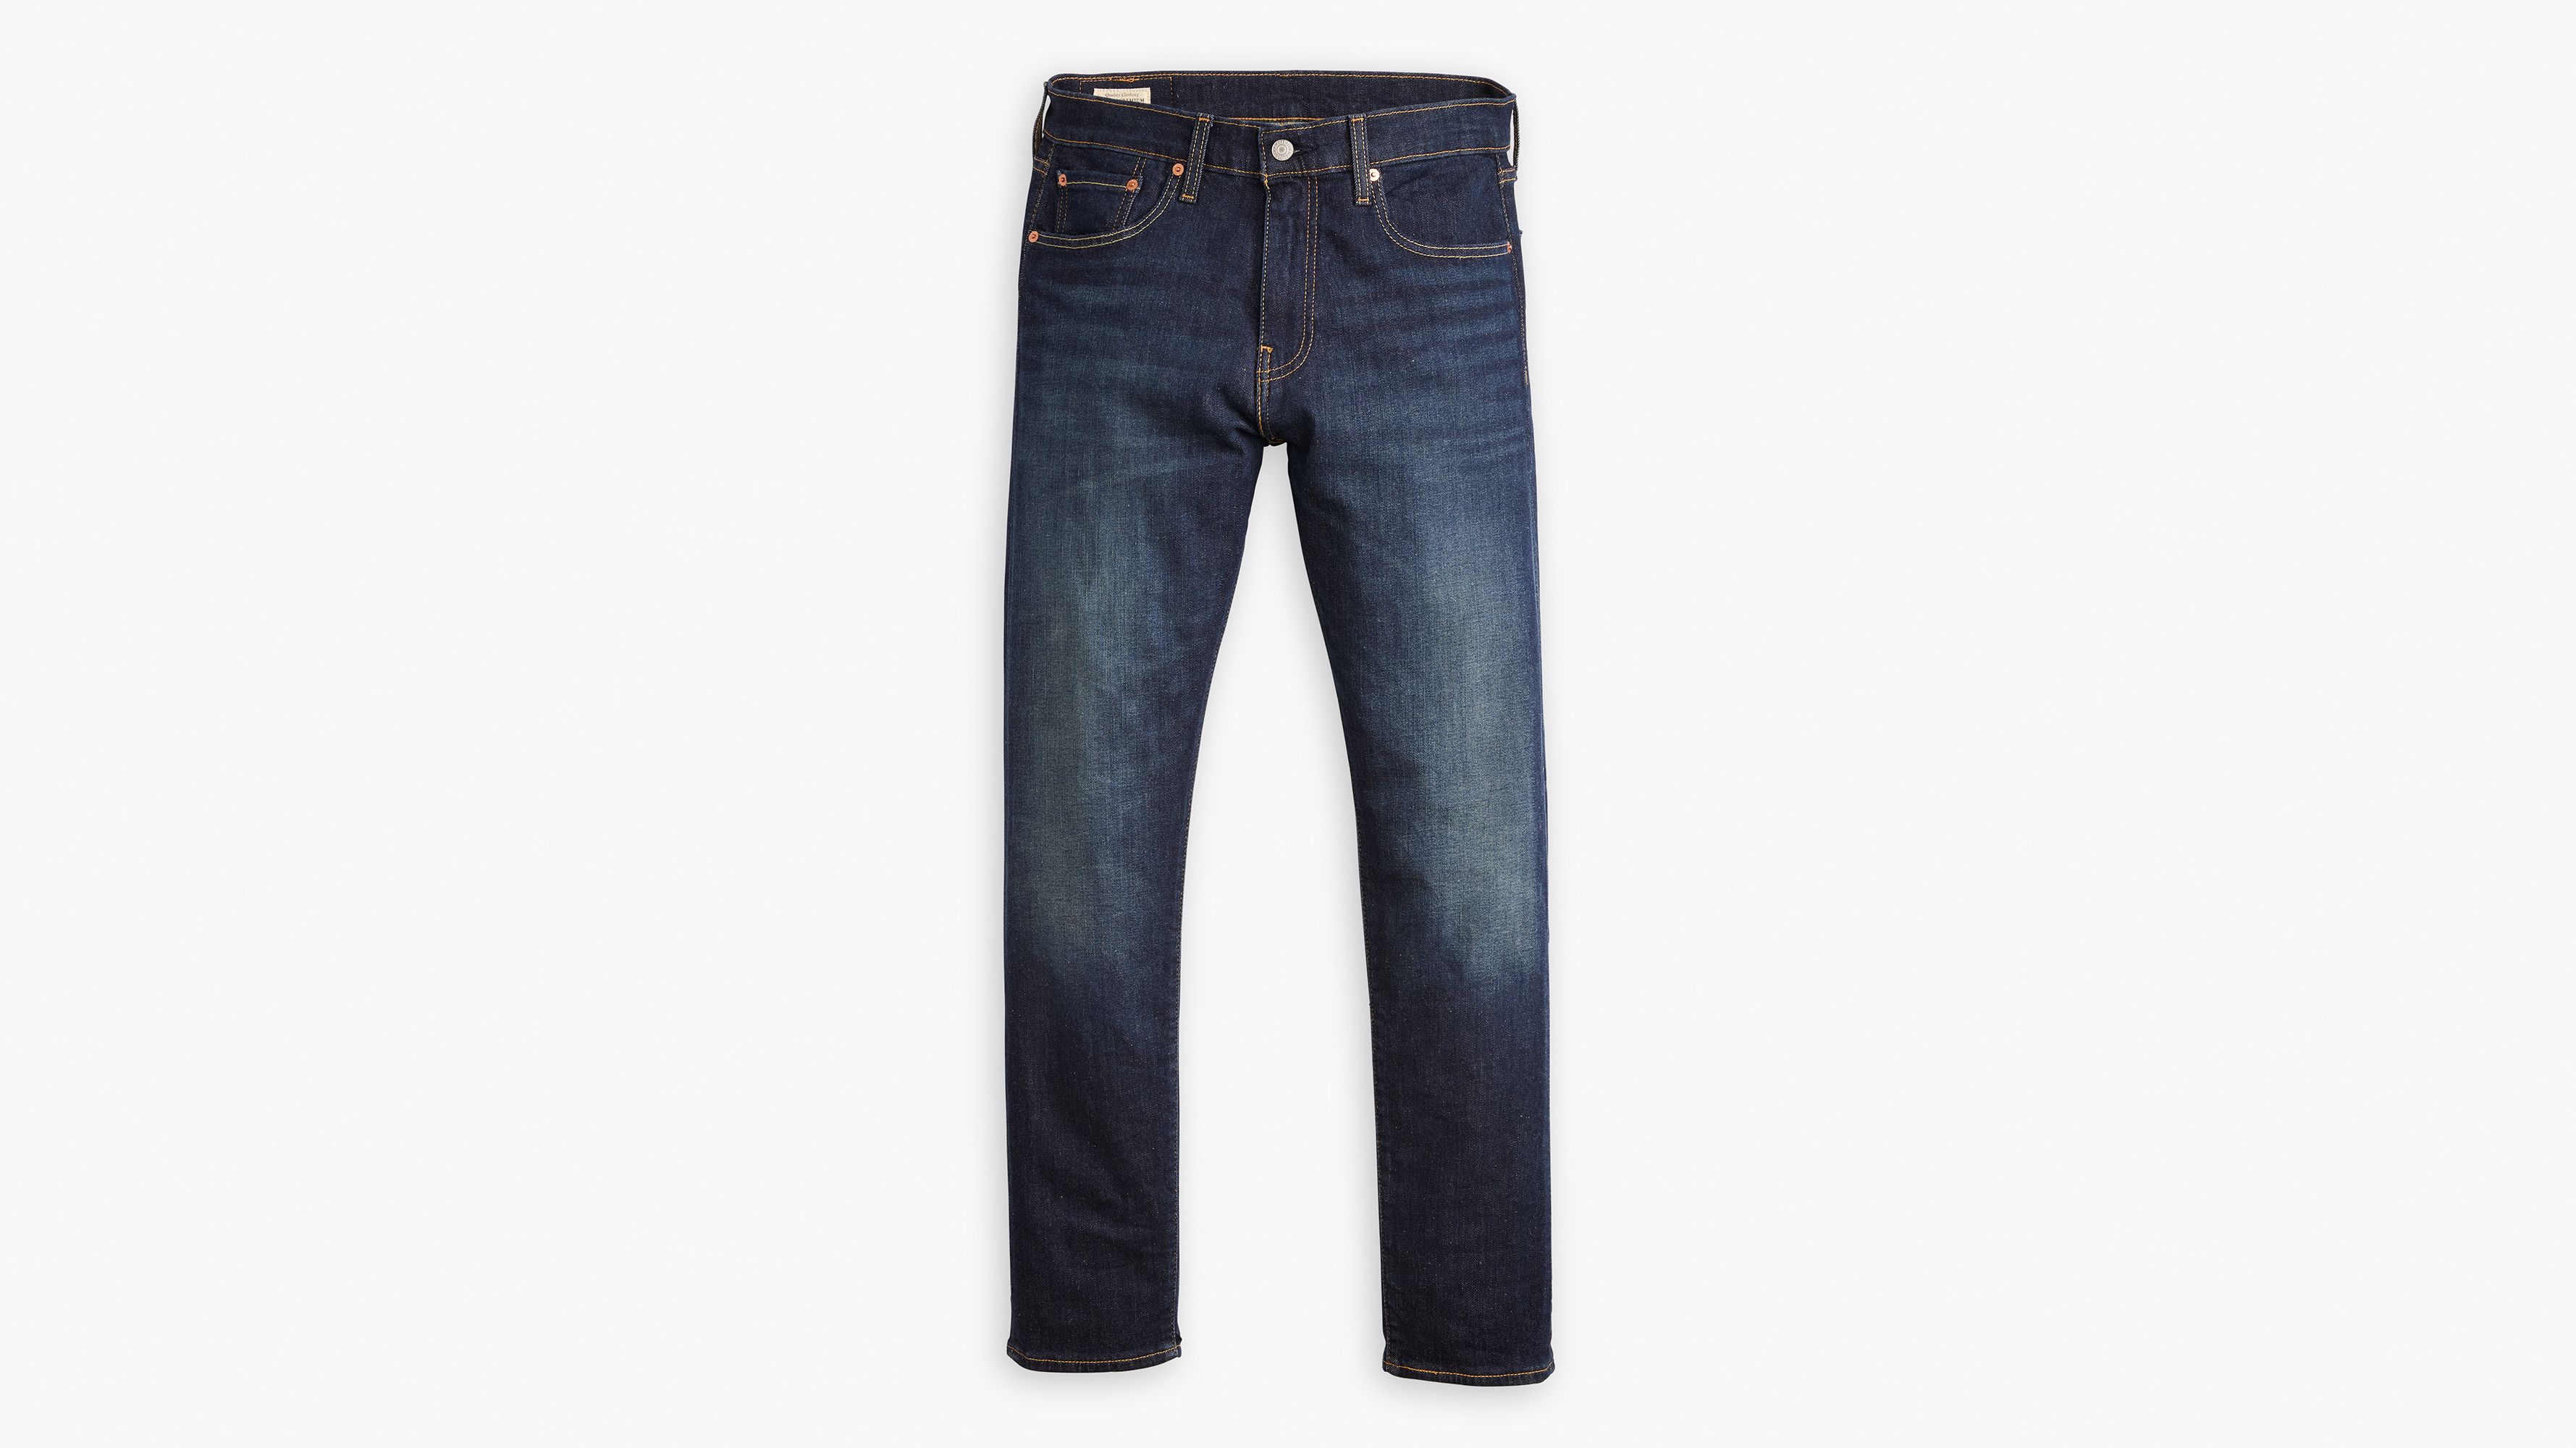 Buy Levi's 512 Slim Taper Fit Jeans (28833) rock cod from £56.60 (Today) –  Best Deals on